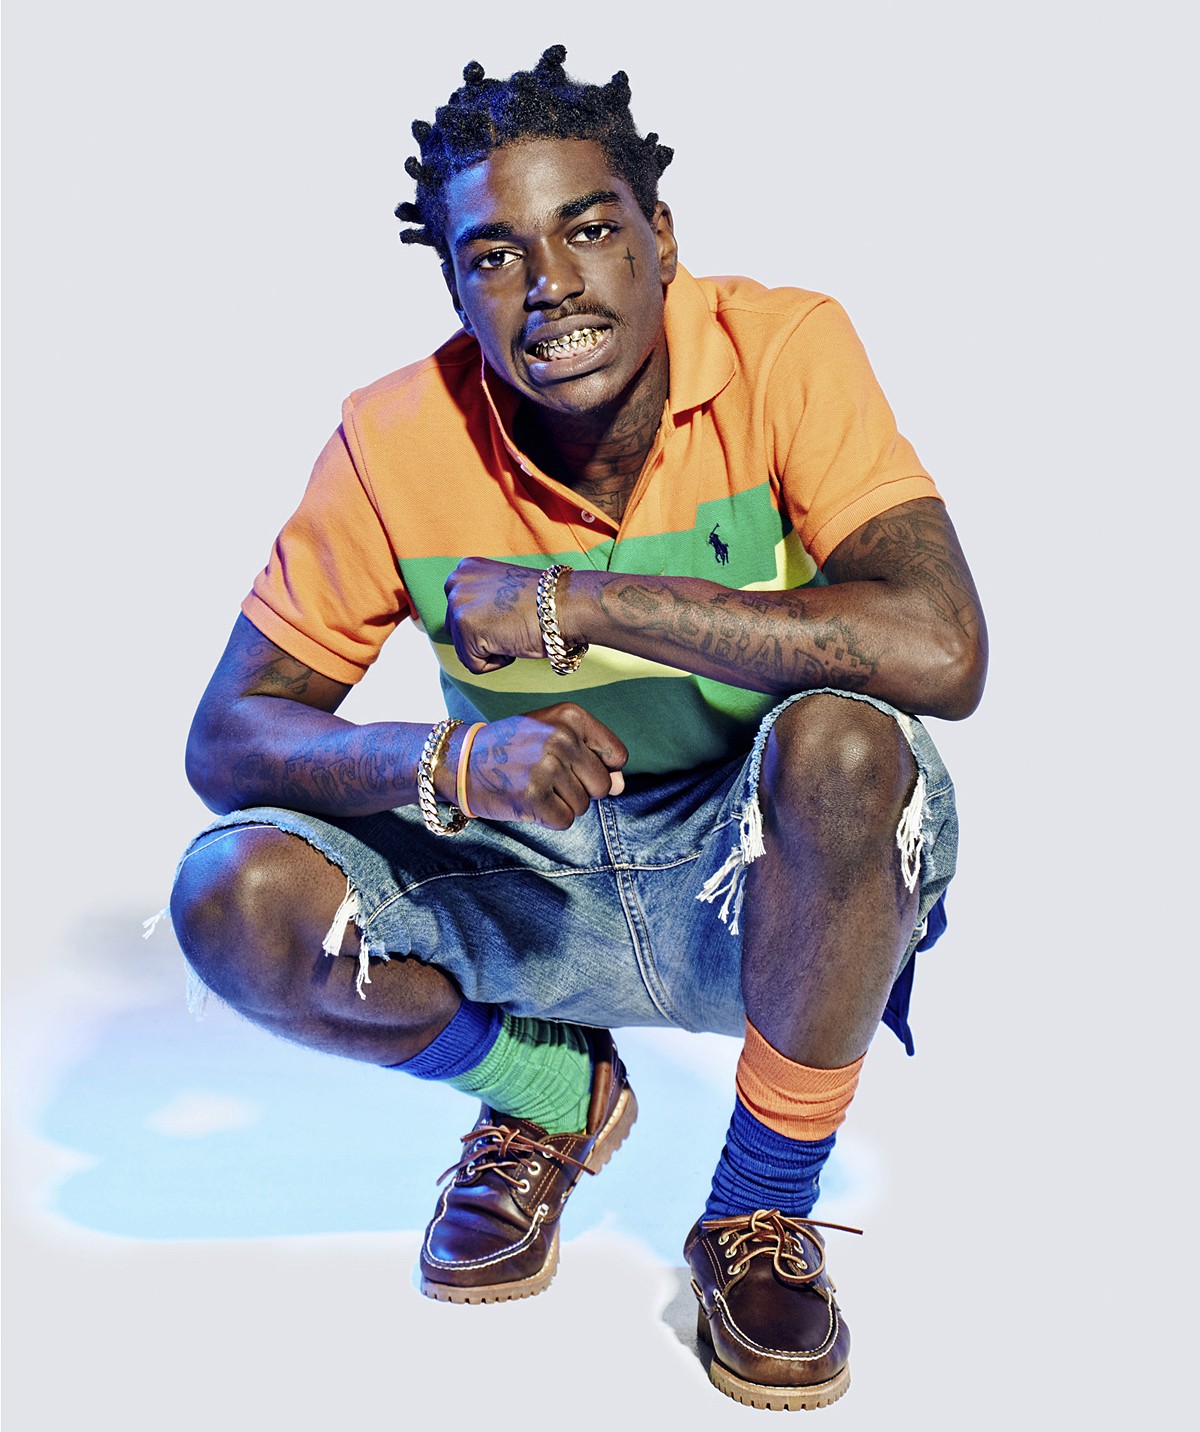 Kodak Black Asks Court To End His Probation Based On Personal Growth